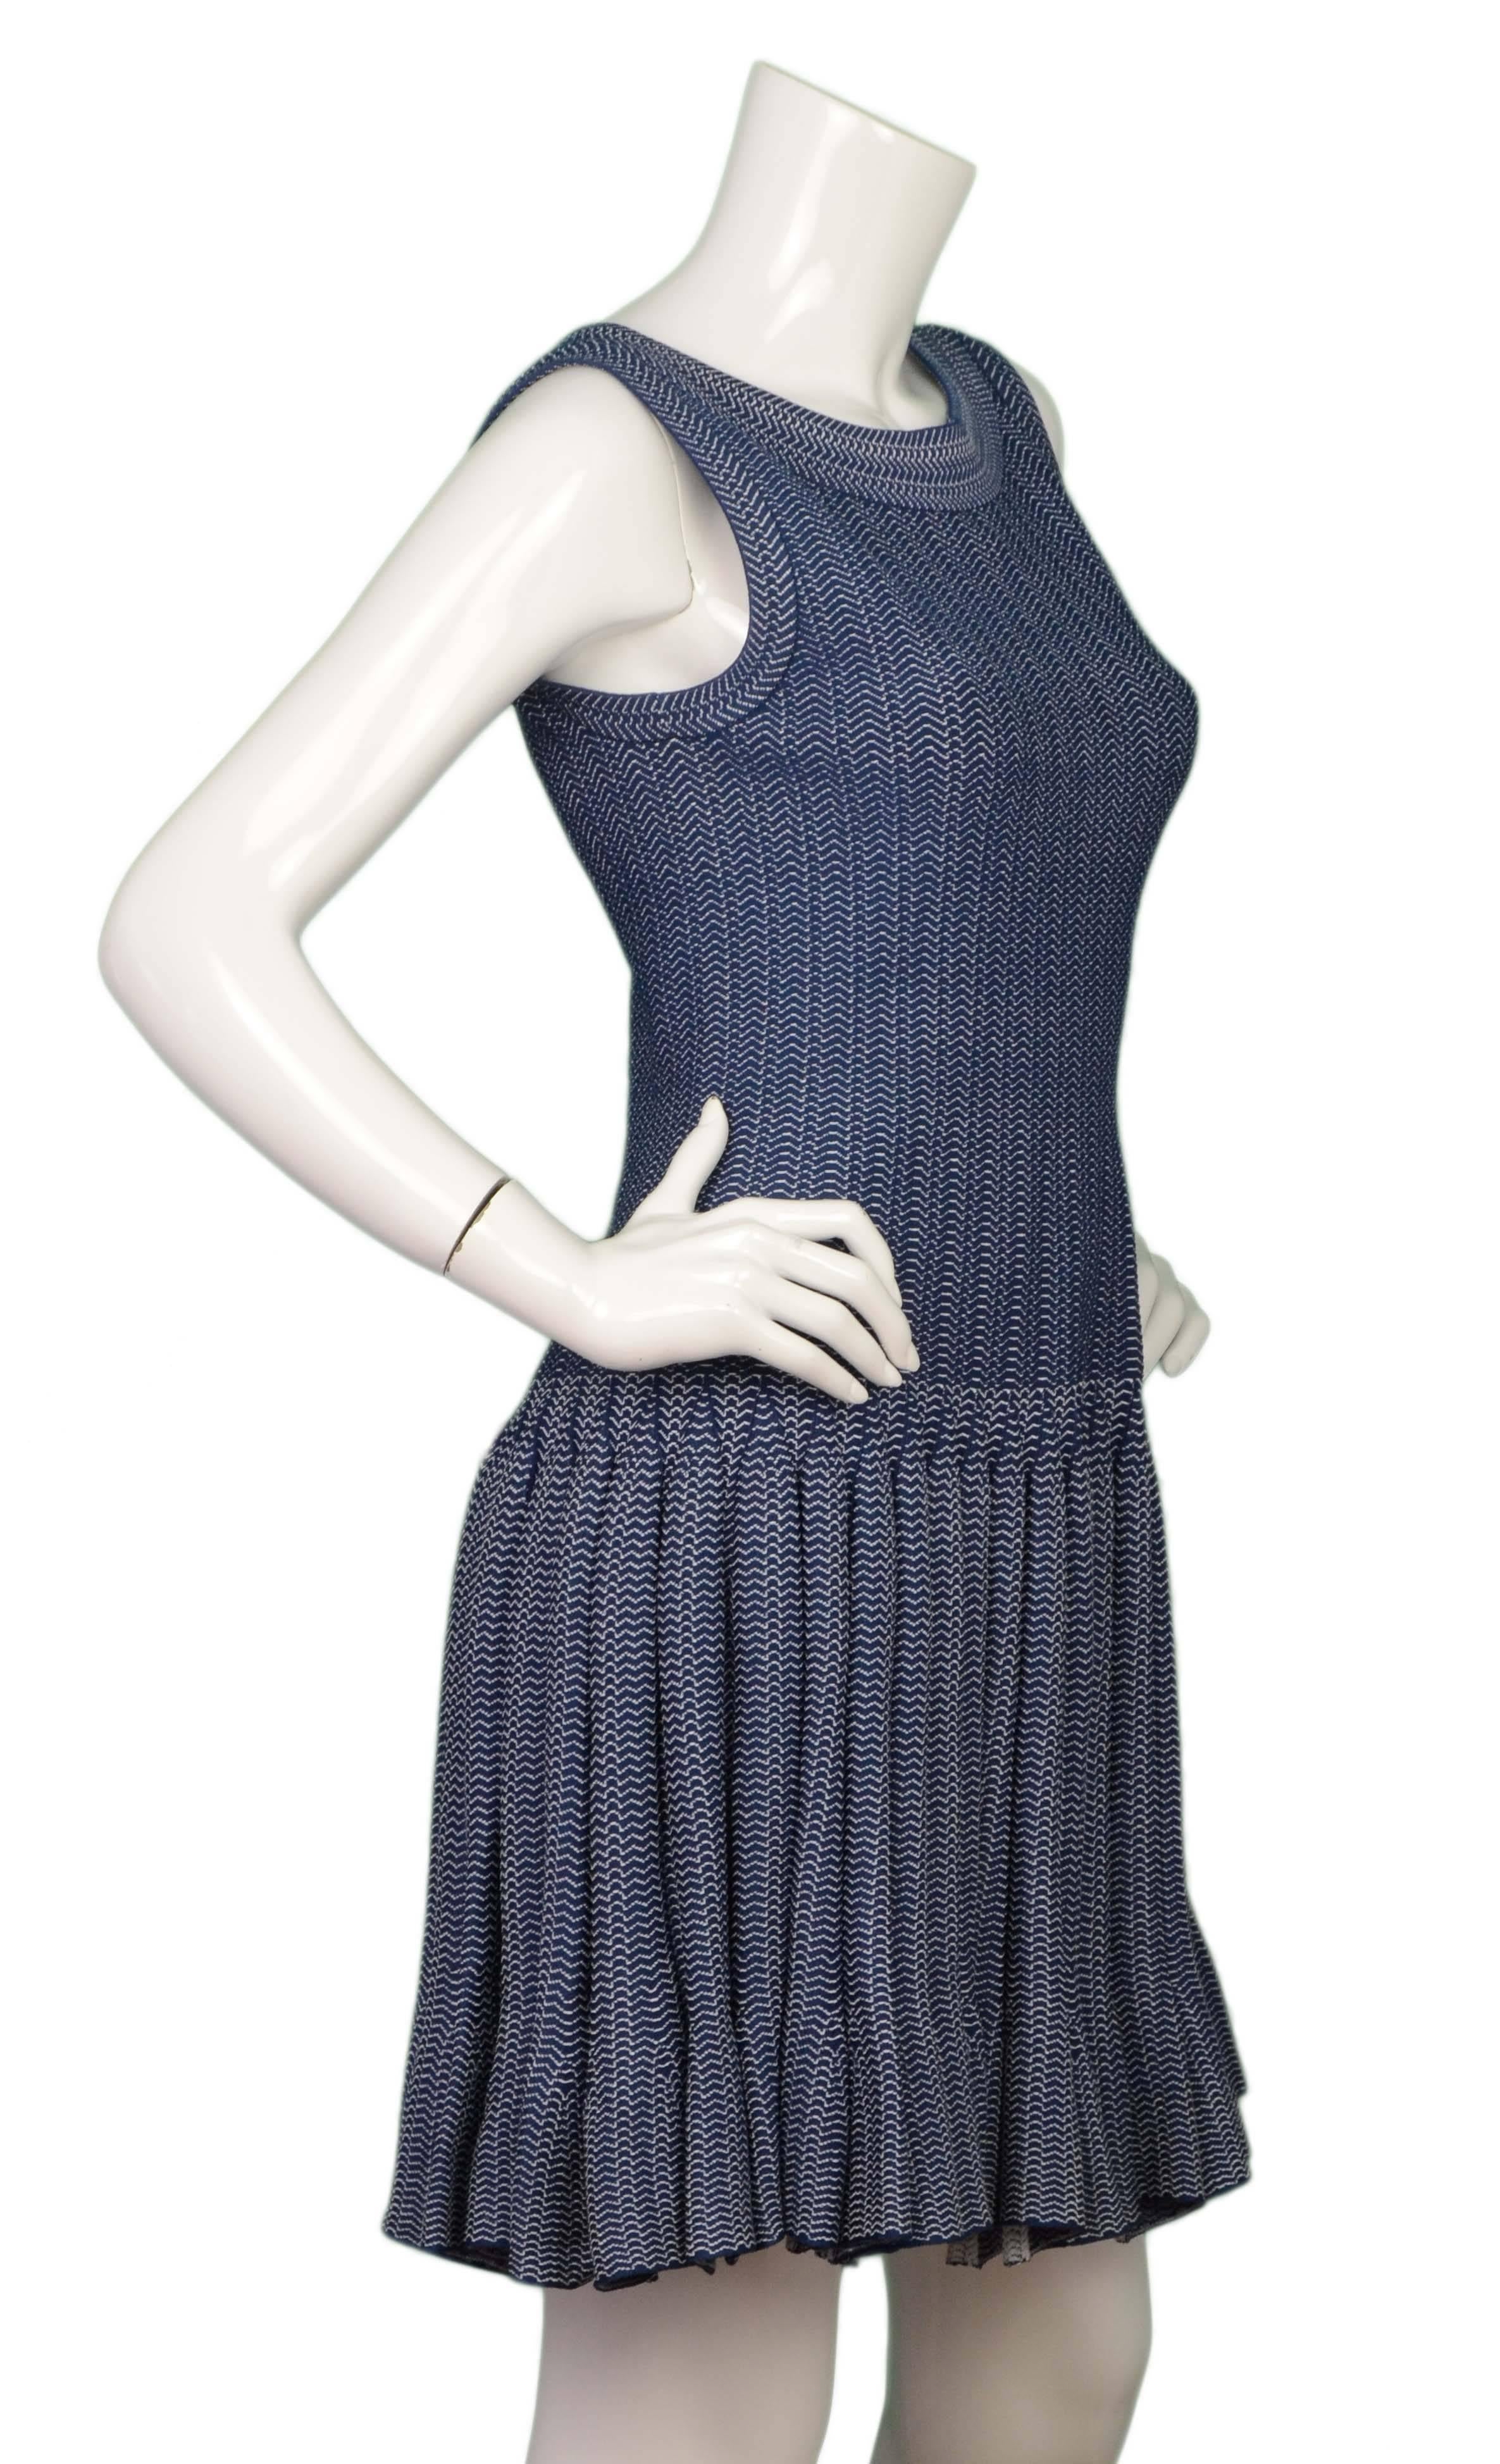 Alaia Blue Sleeveless Fit & Flare Dress 
Features white zig zag print throughout
Made In: Italy
Color: Blue and white
Composition: 75% viscose, 12% nylon, 10% polyester, 3% elastane
Lining: None
Closure/Opening: Back center zip up and hook